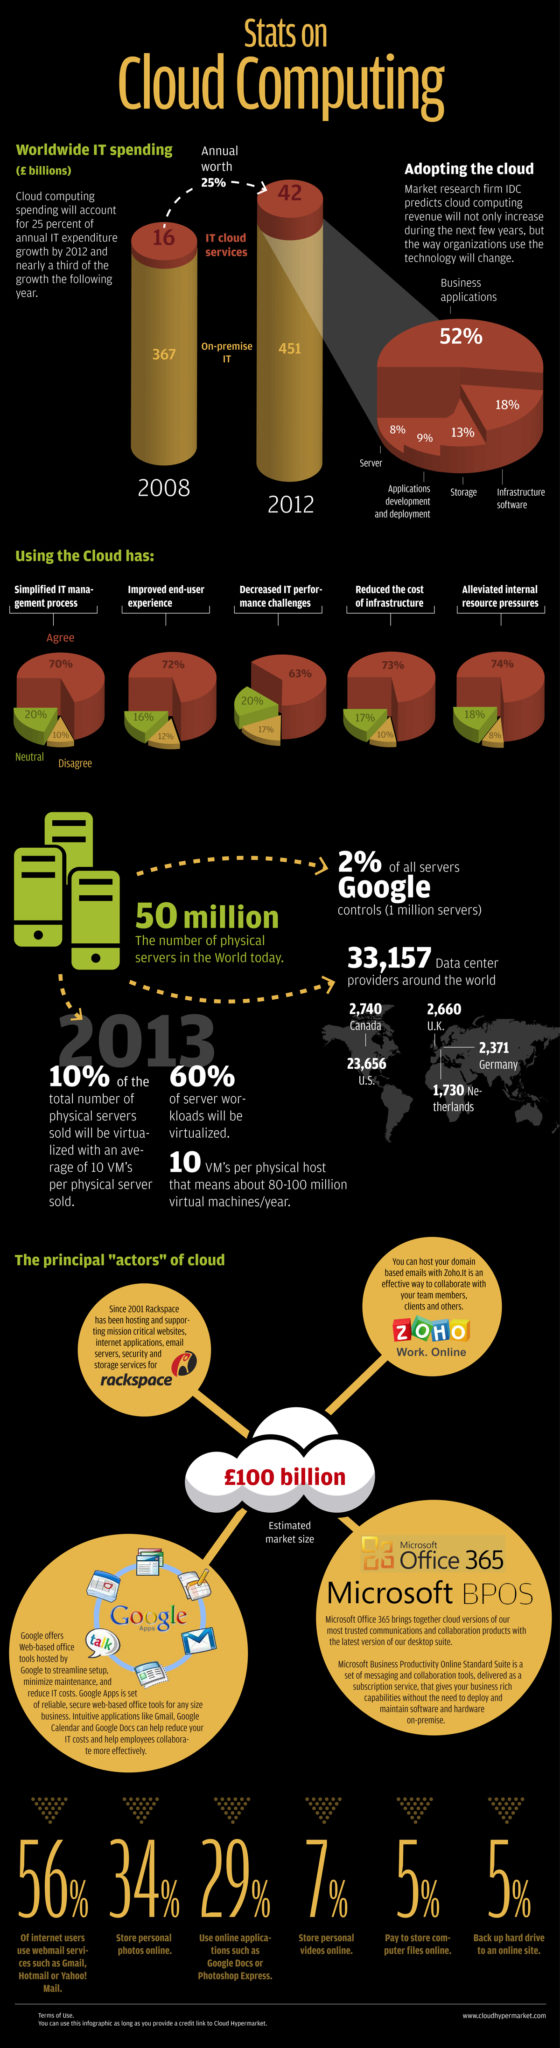 cloud infographic 2010 1